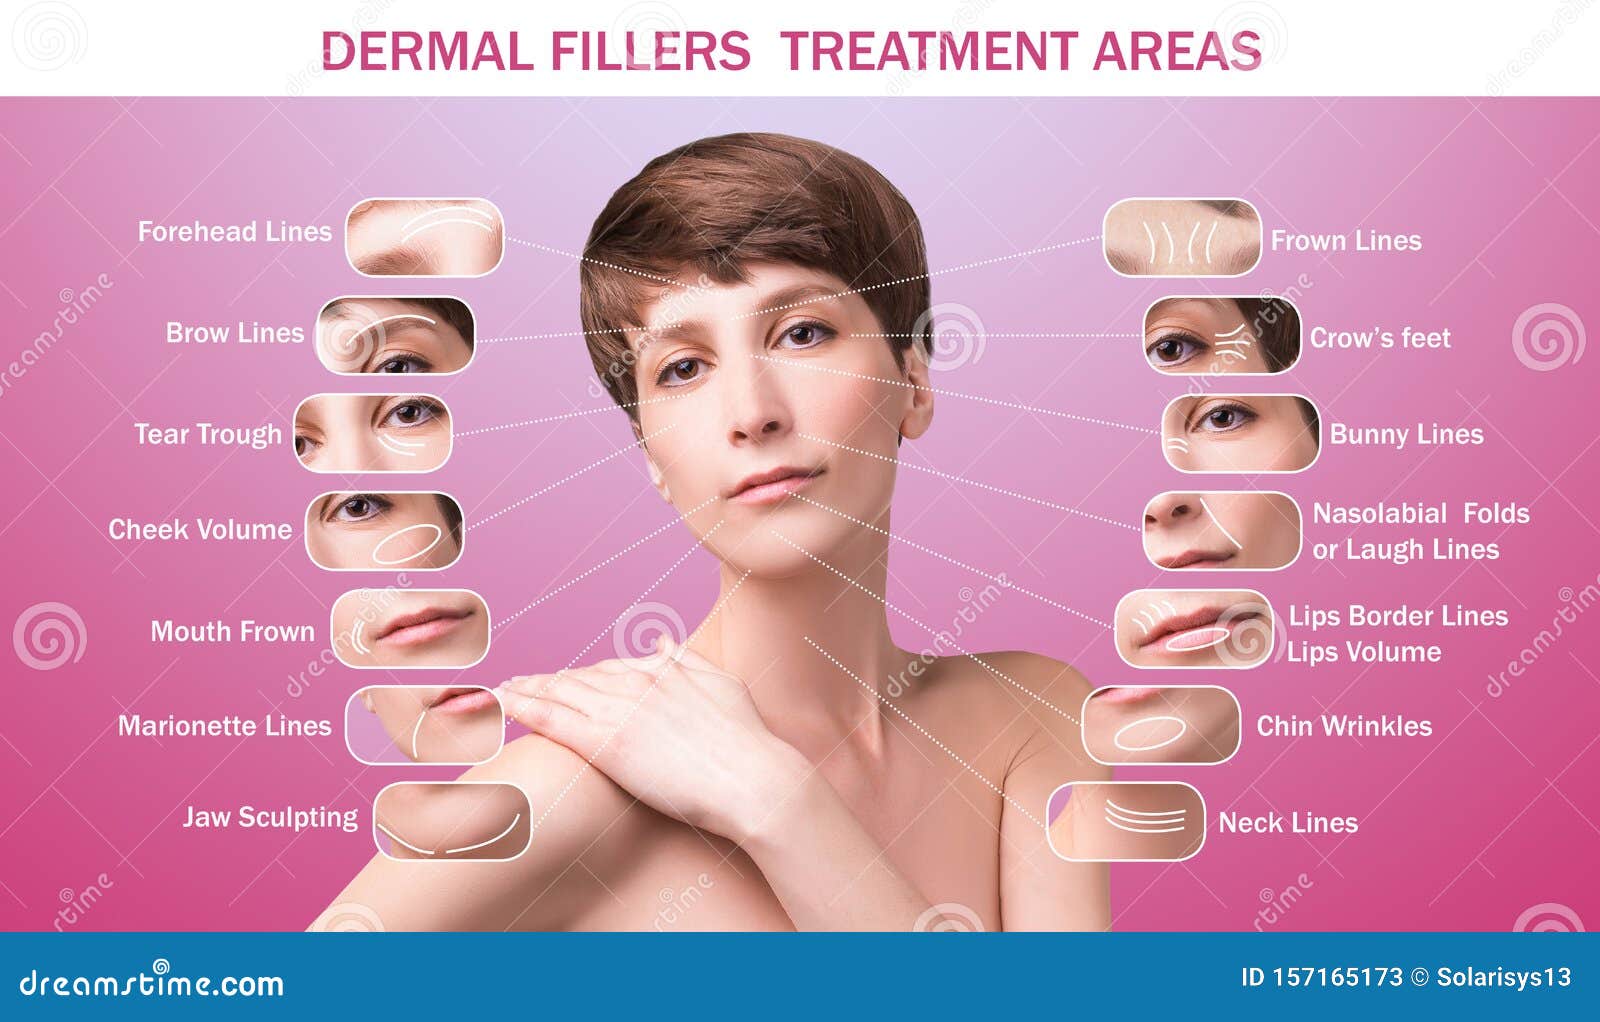 treatment areas for anti-wrinkle injection.